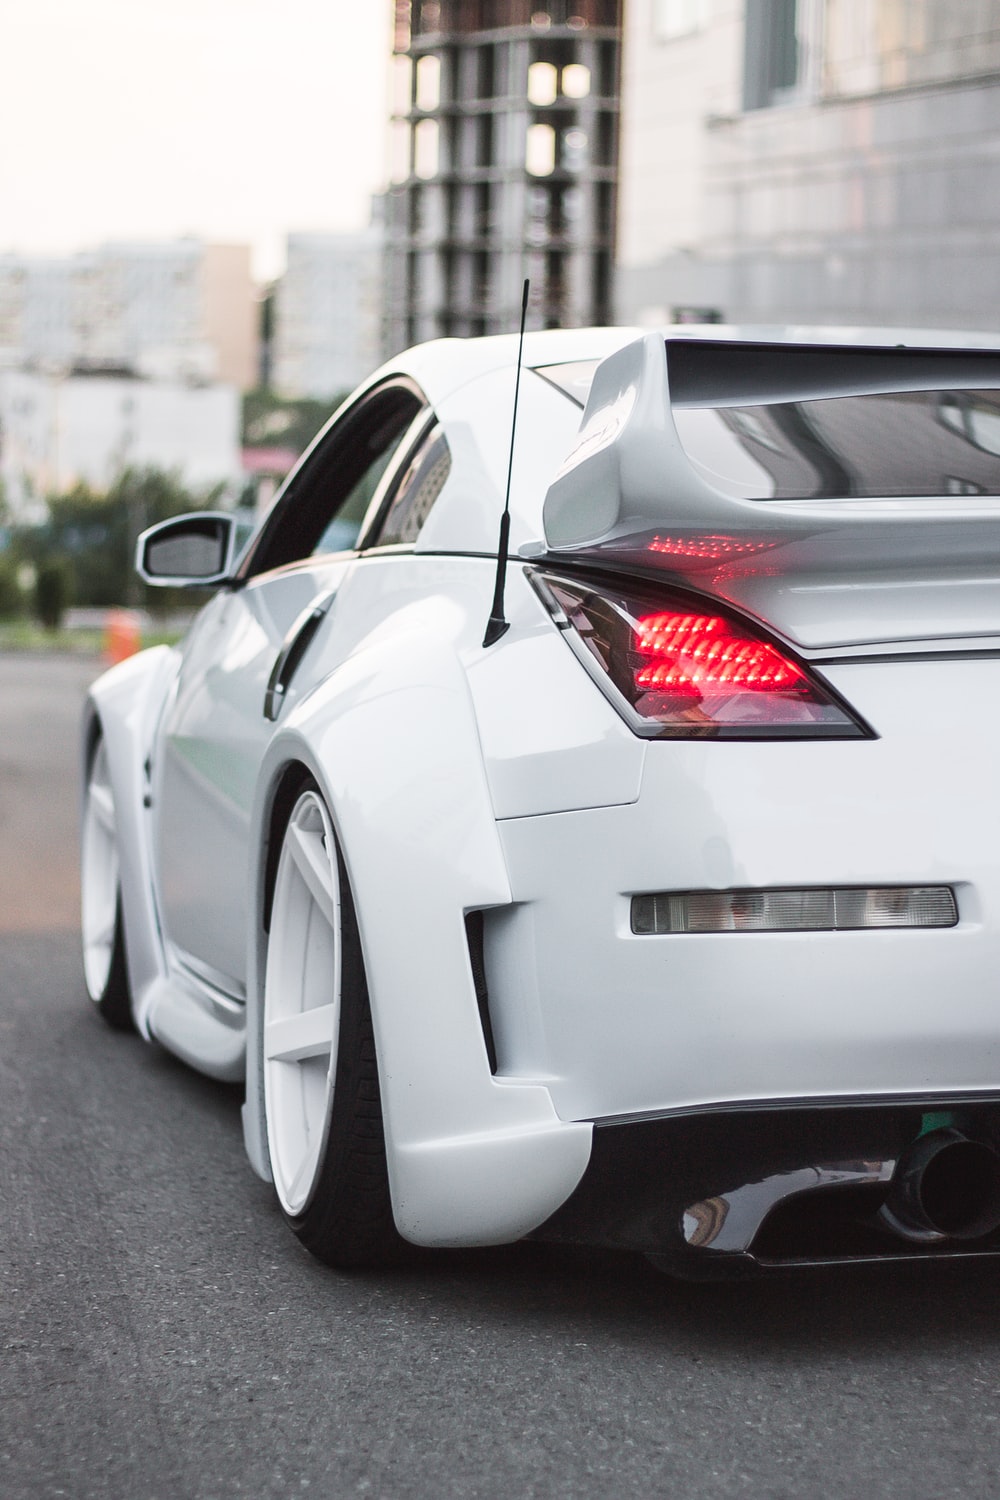 Nissan 350z Picture. Download Free Image